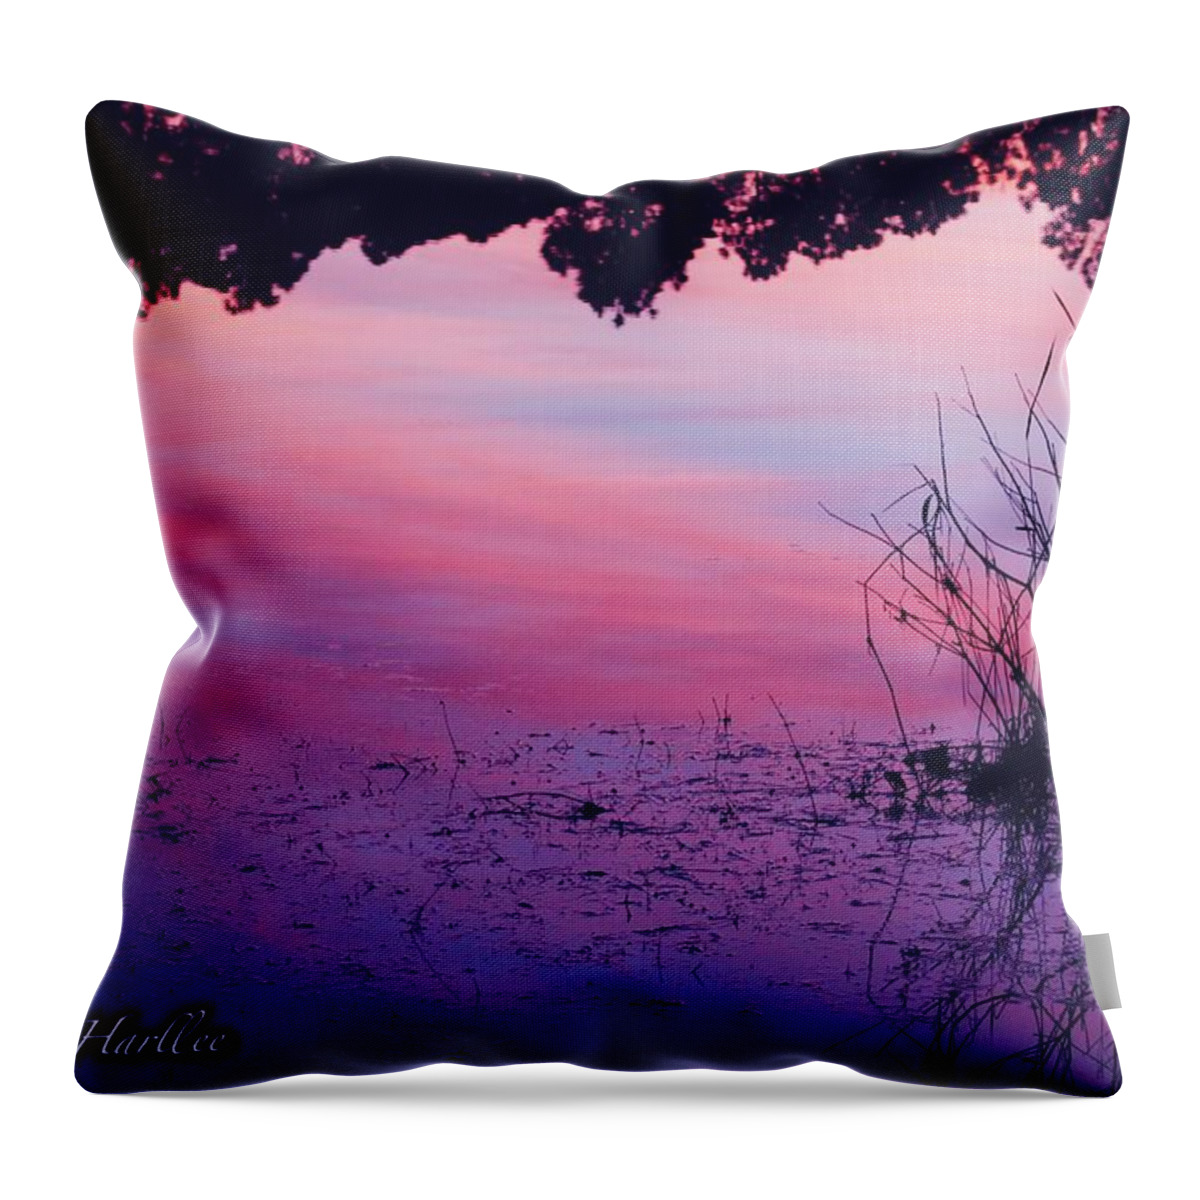  Throw Pillow featuring the photograph Mood Lake by Elizabeth Harllee